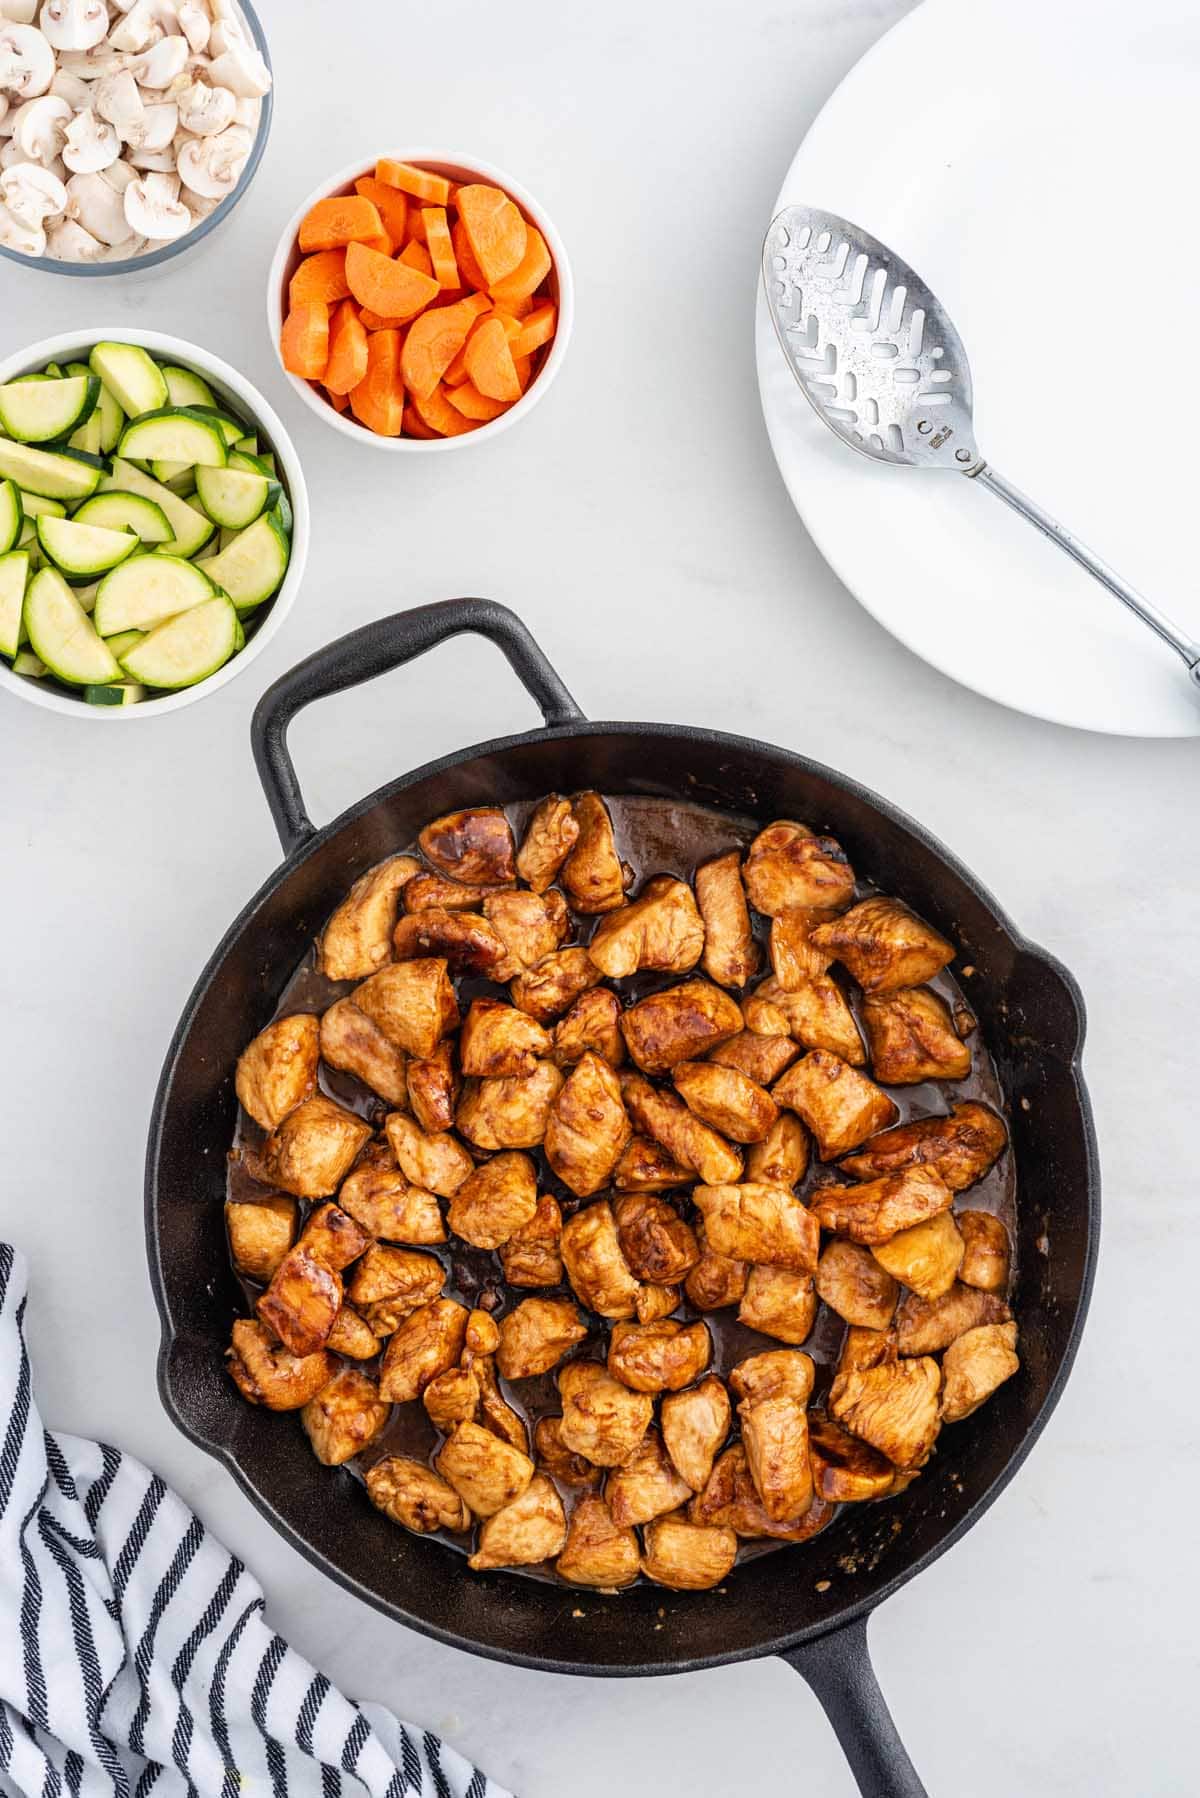 cook the chicken in a skillet